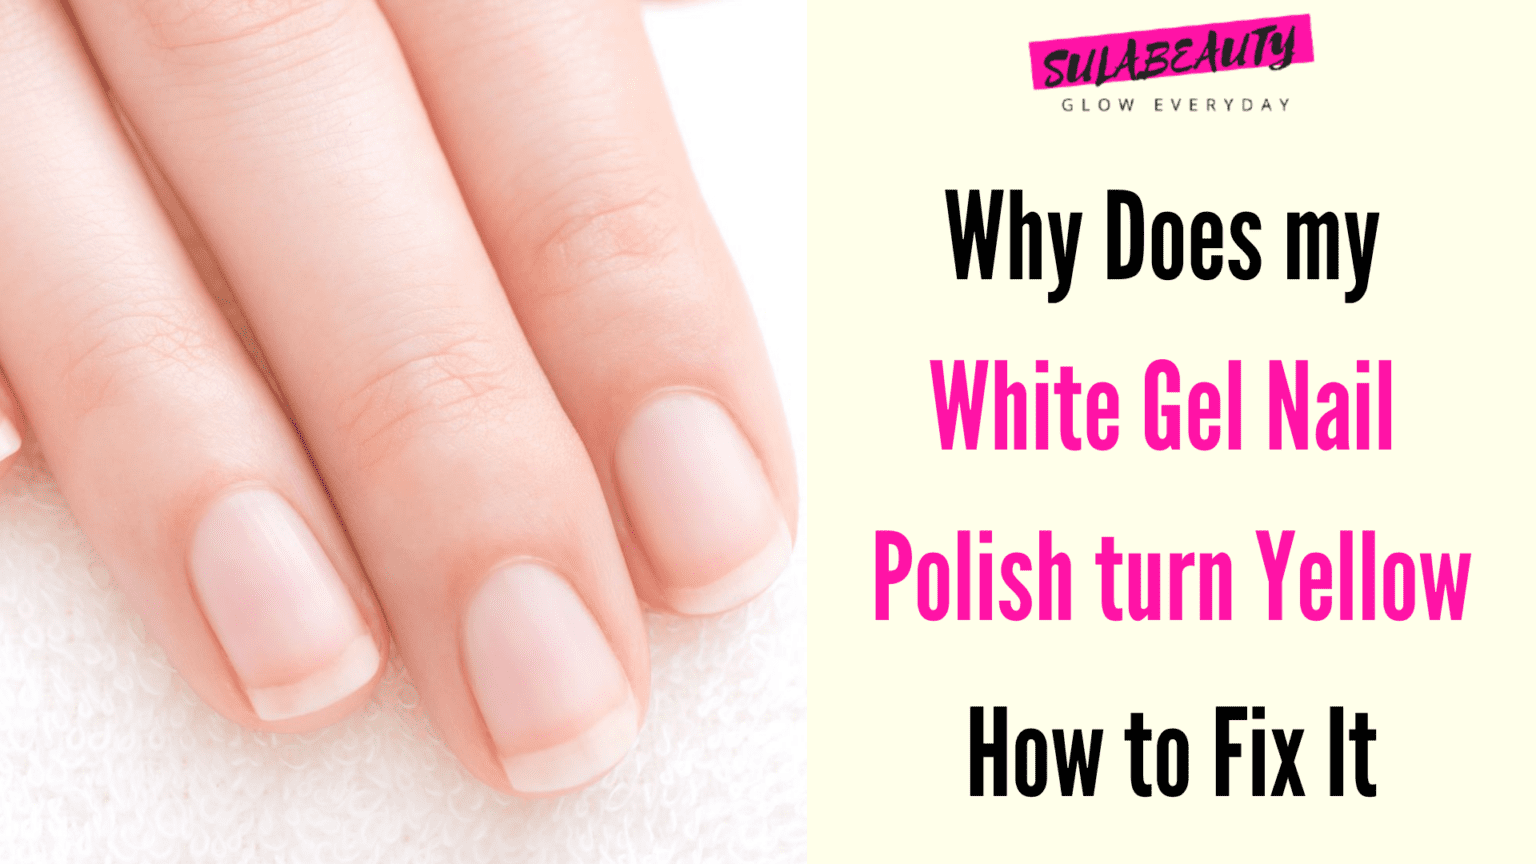 1. How to Fix Gel Nail Polish That Has Changed Color - wide 3